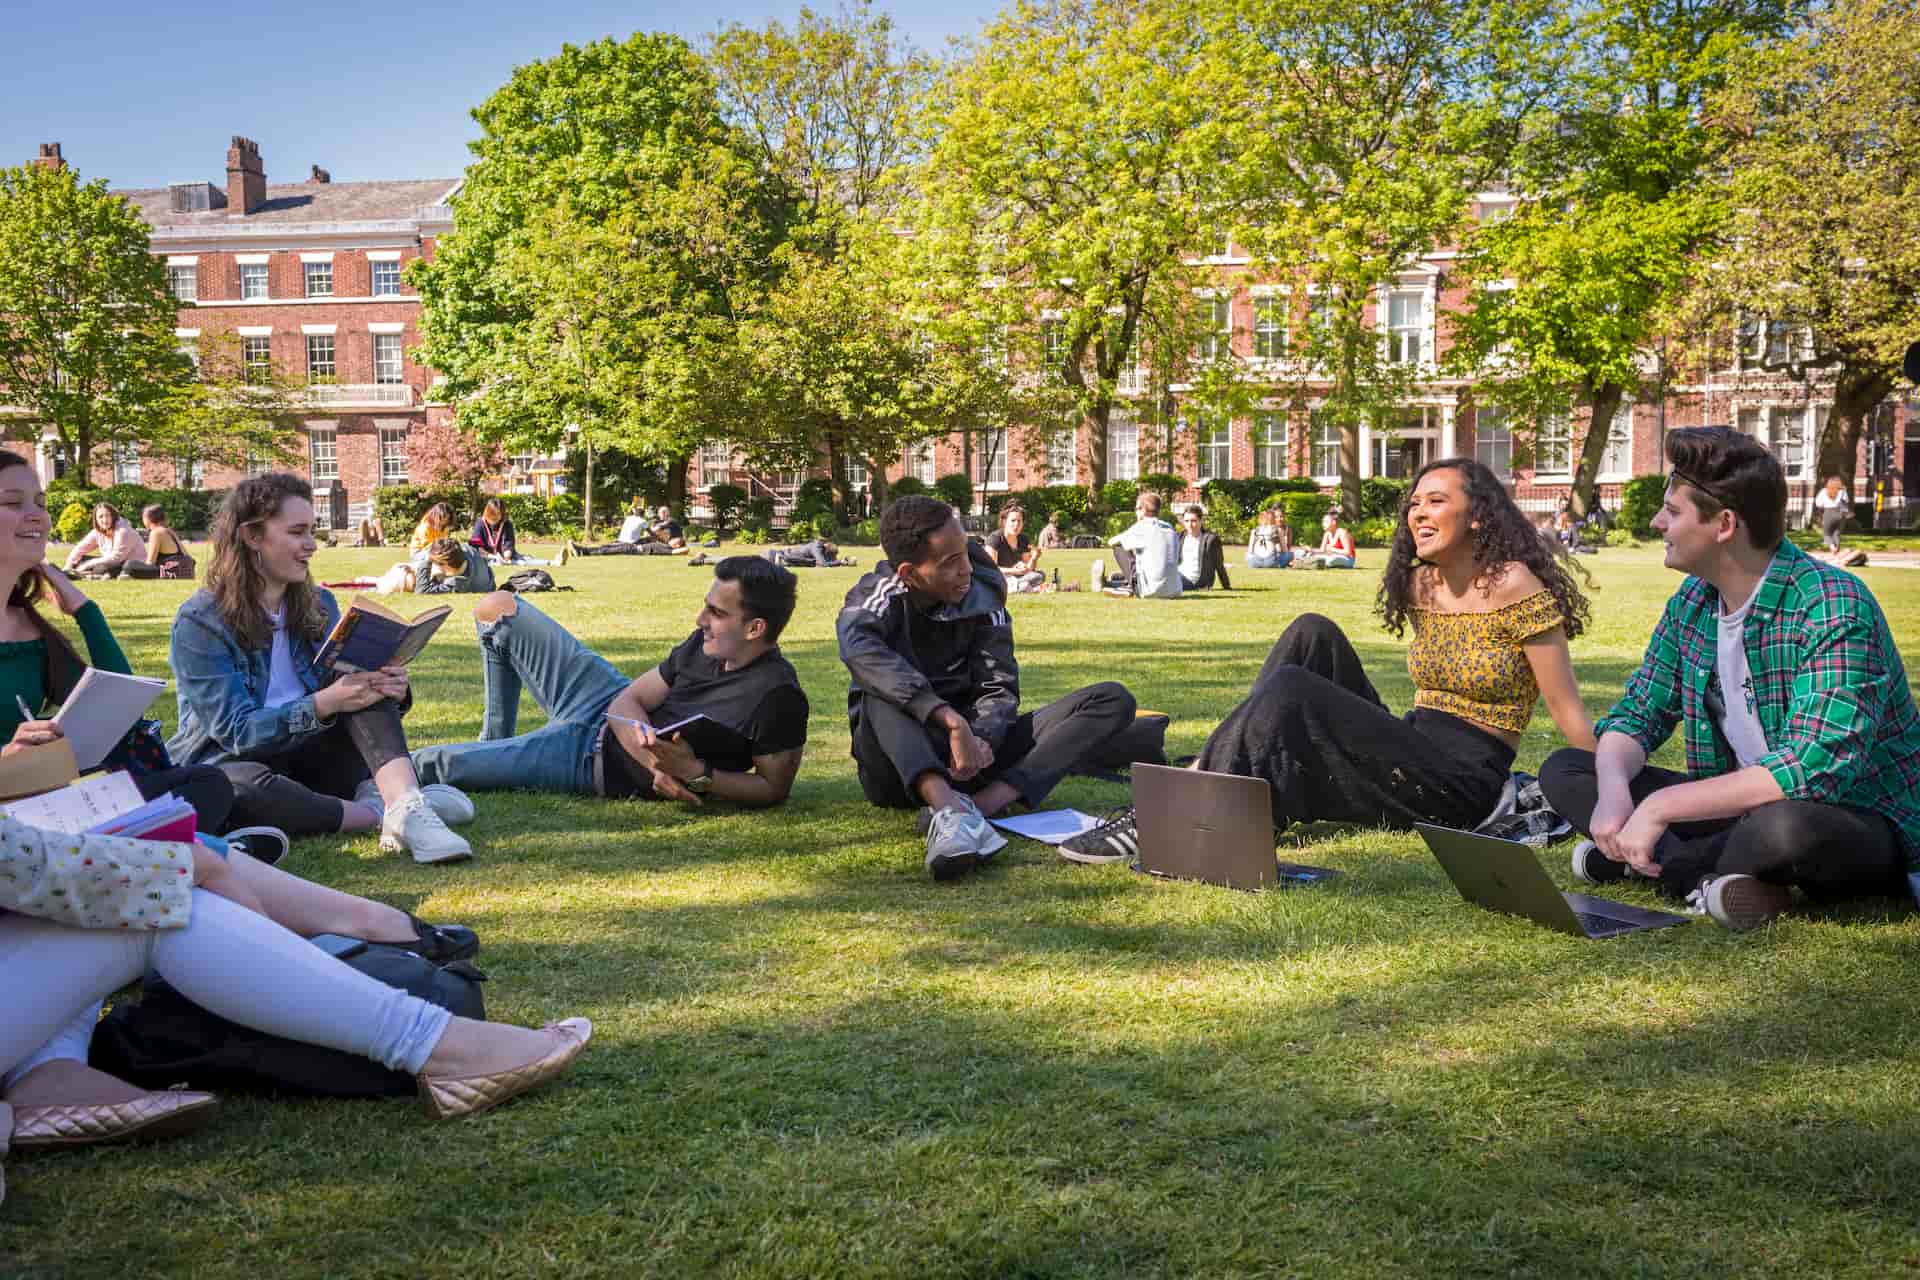 Abercromby Square with students sitting on grass